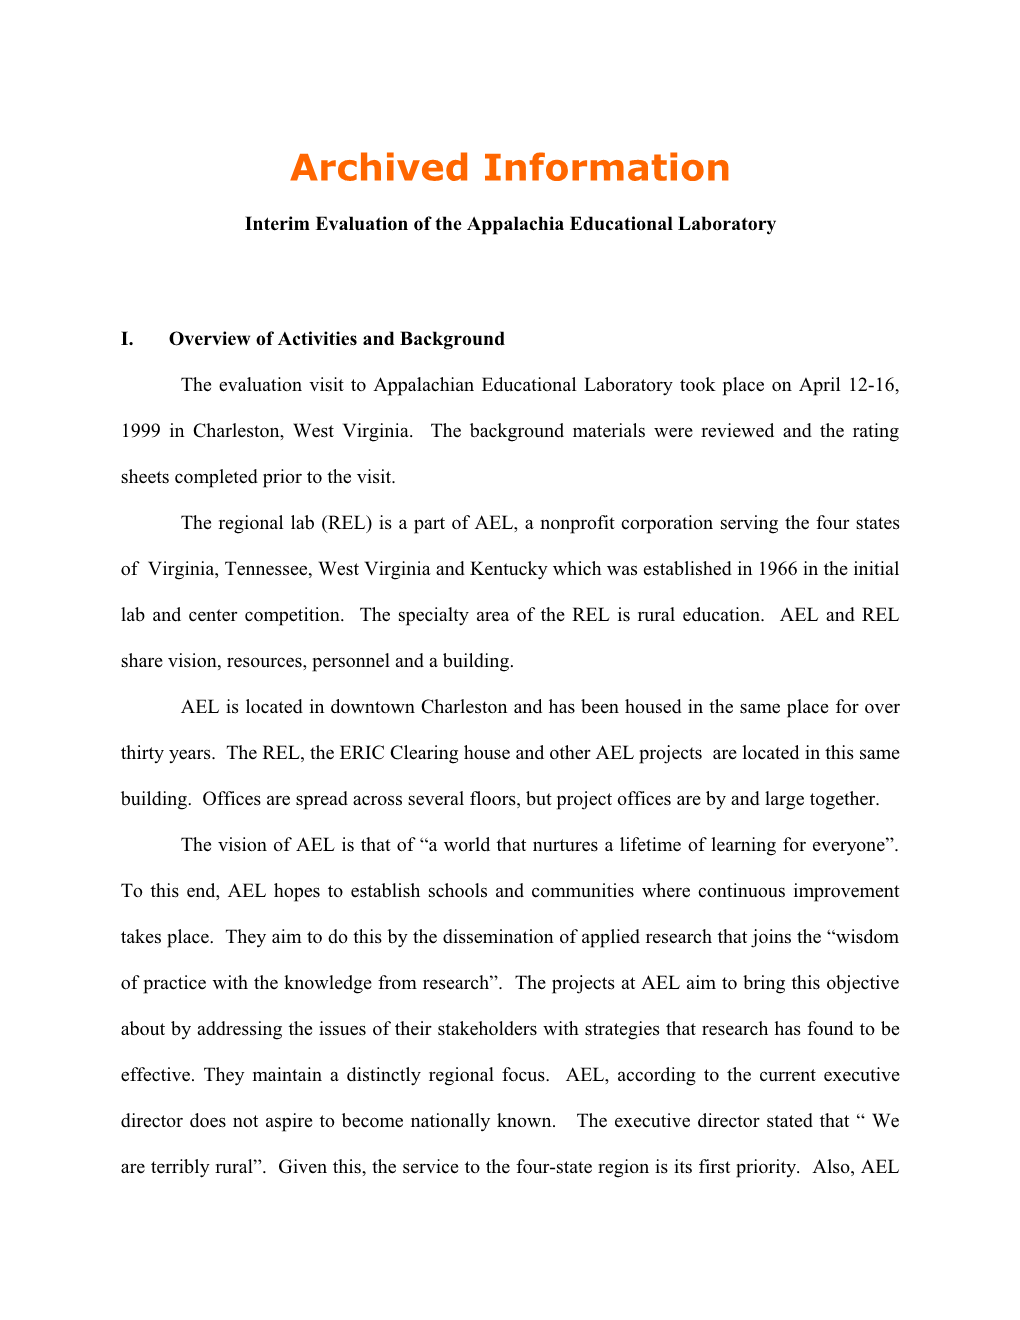 Archived: H-AEL Report 3 (MS Word)